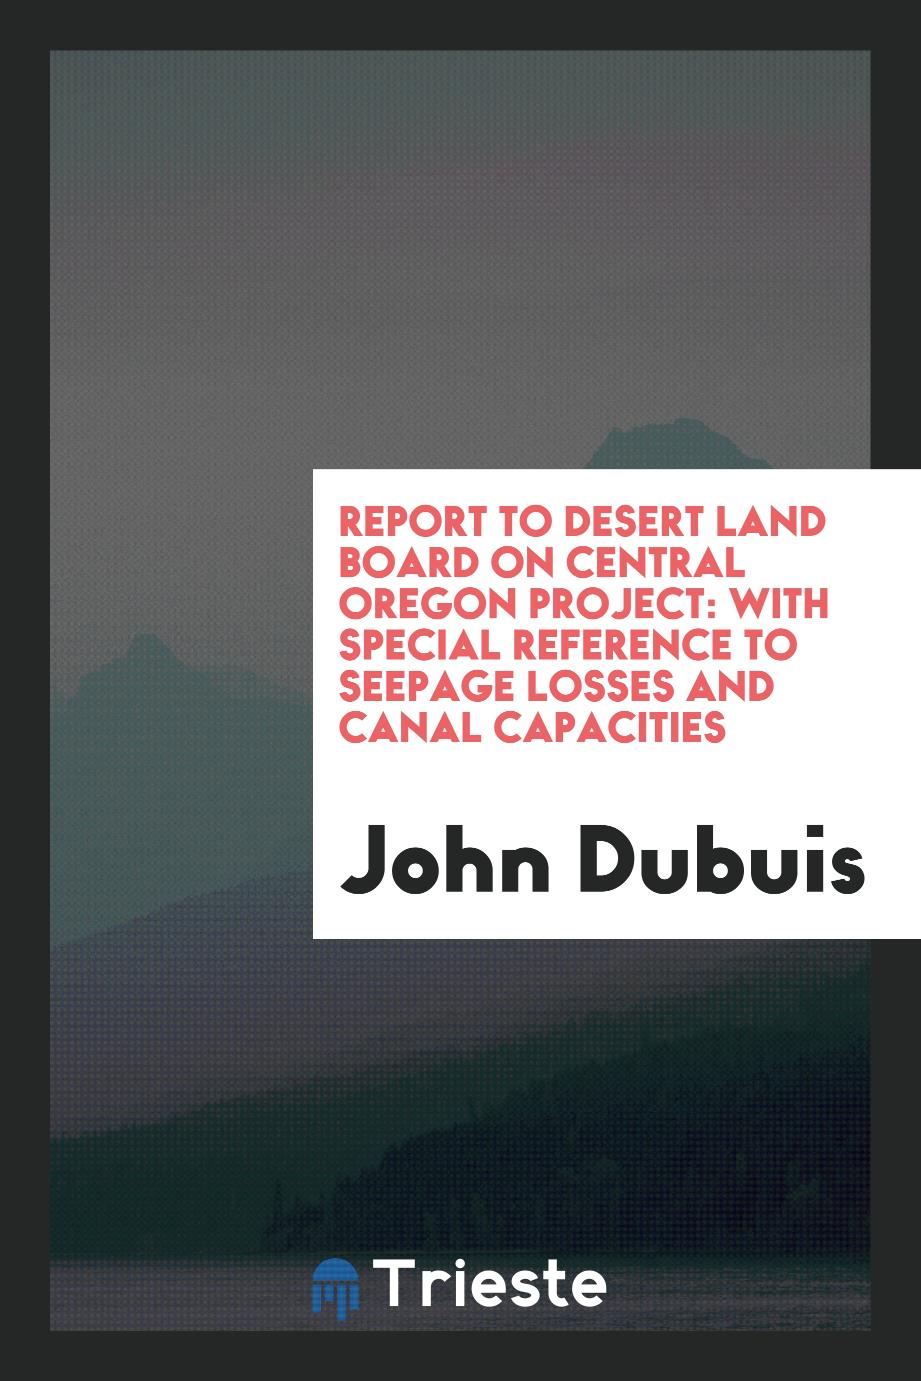 Report to Desert Land Board on Central Oregon Project: With Special reference to seepage losses and canal capacities